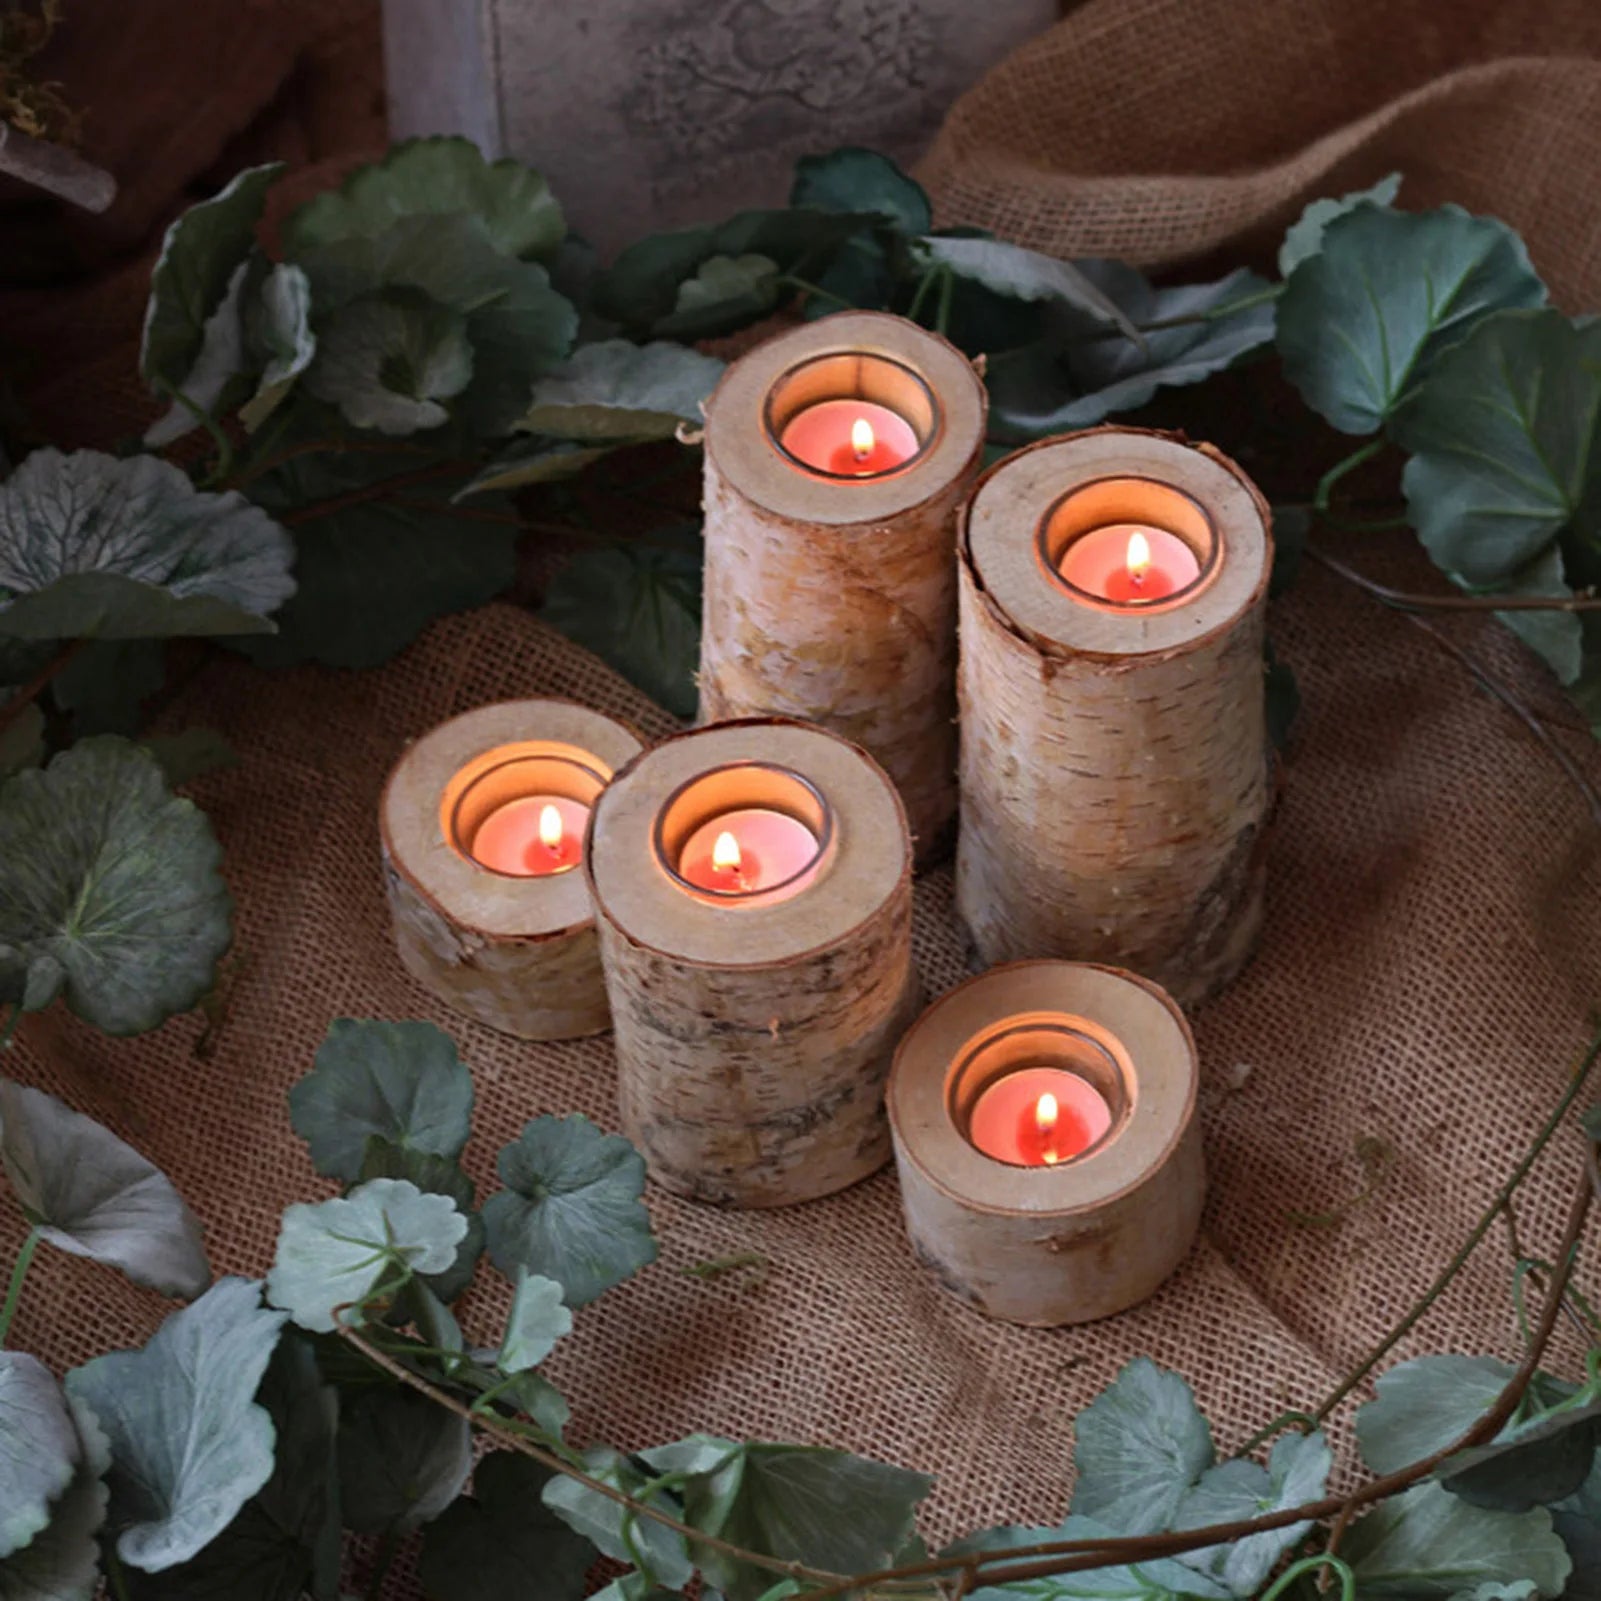 Birch Wood Candle Holder